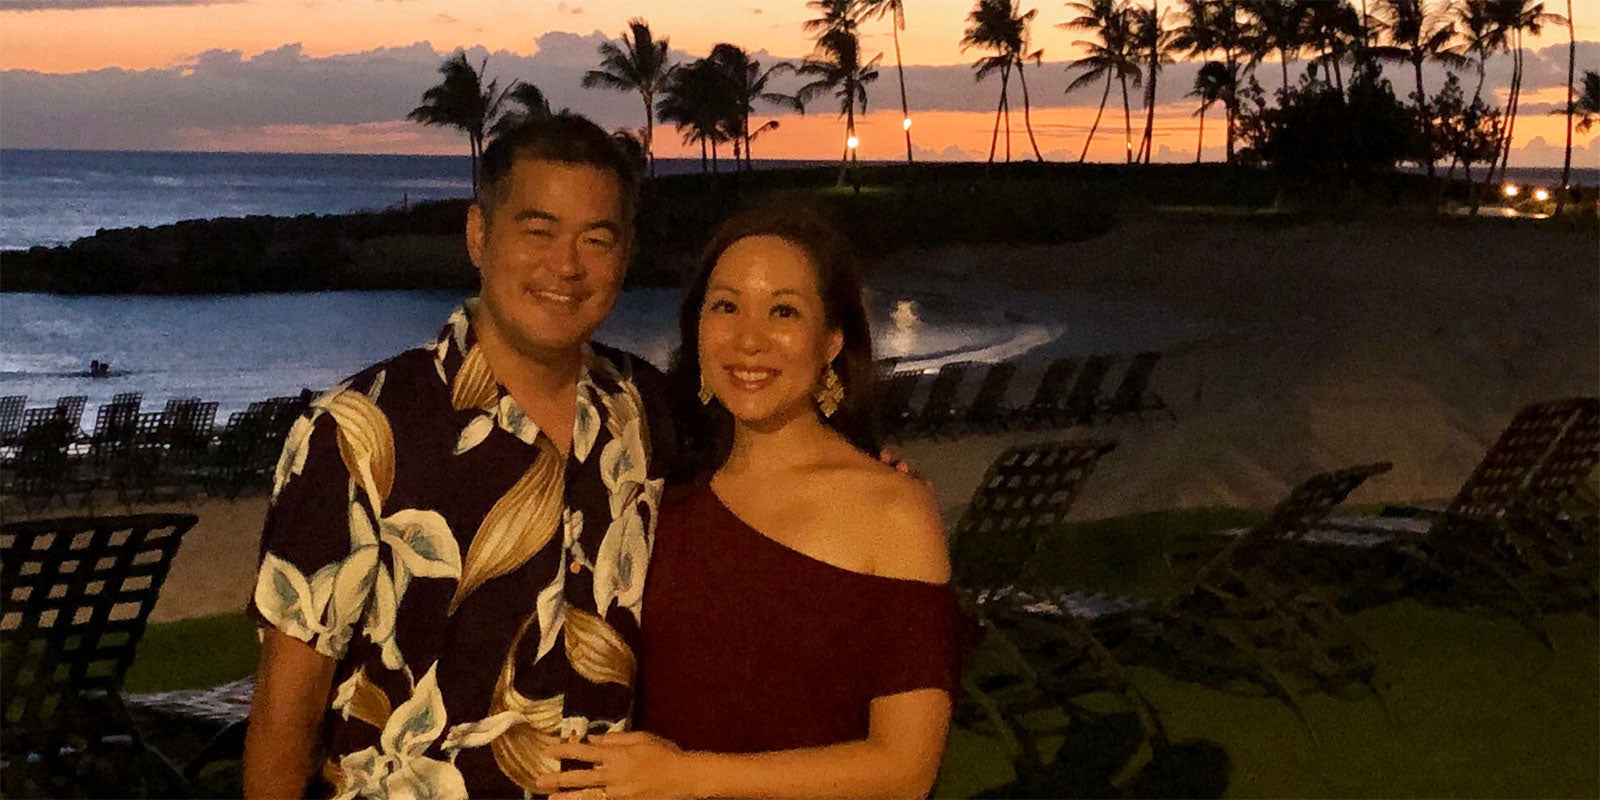 Ko Olina is a great place to watch a sunset!